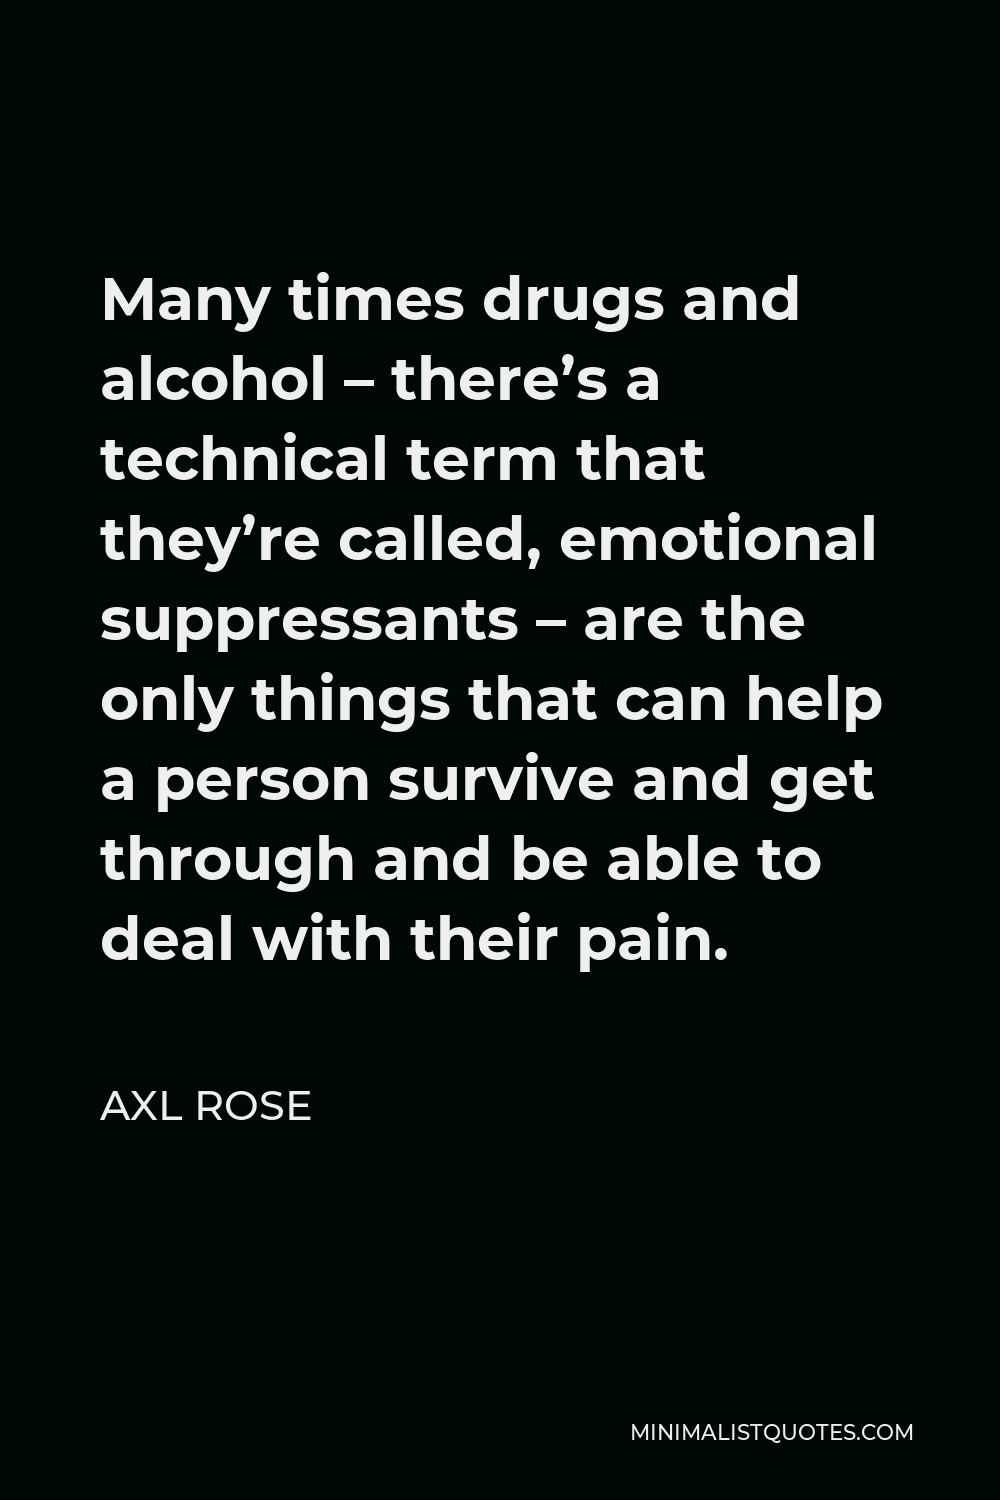 Axl Rose Quote - Many times drugs and alcohol – there’s a technical term that they’re called, emotional suppressants – are the only things that can help a person survive and get through and be able to deal with their pain.